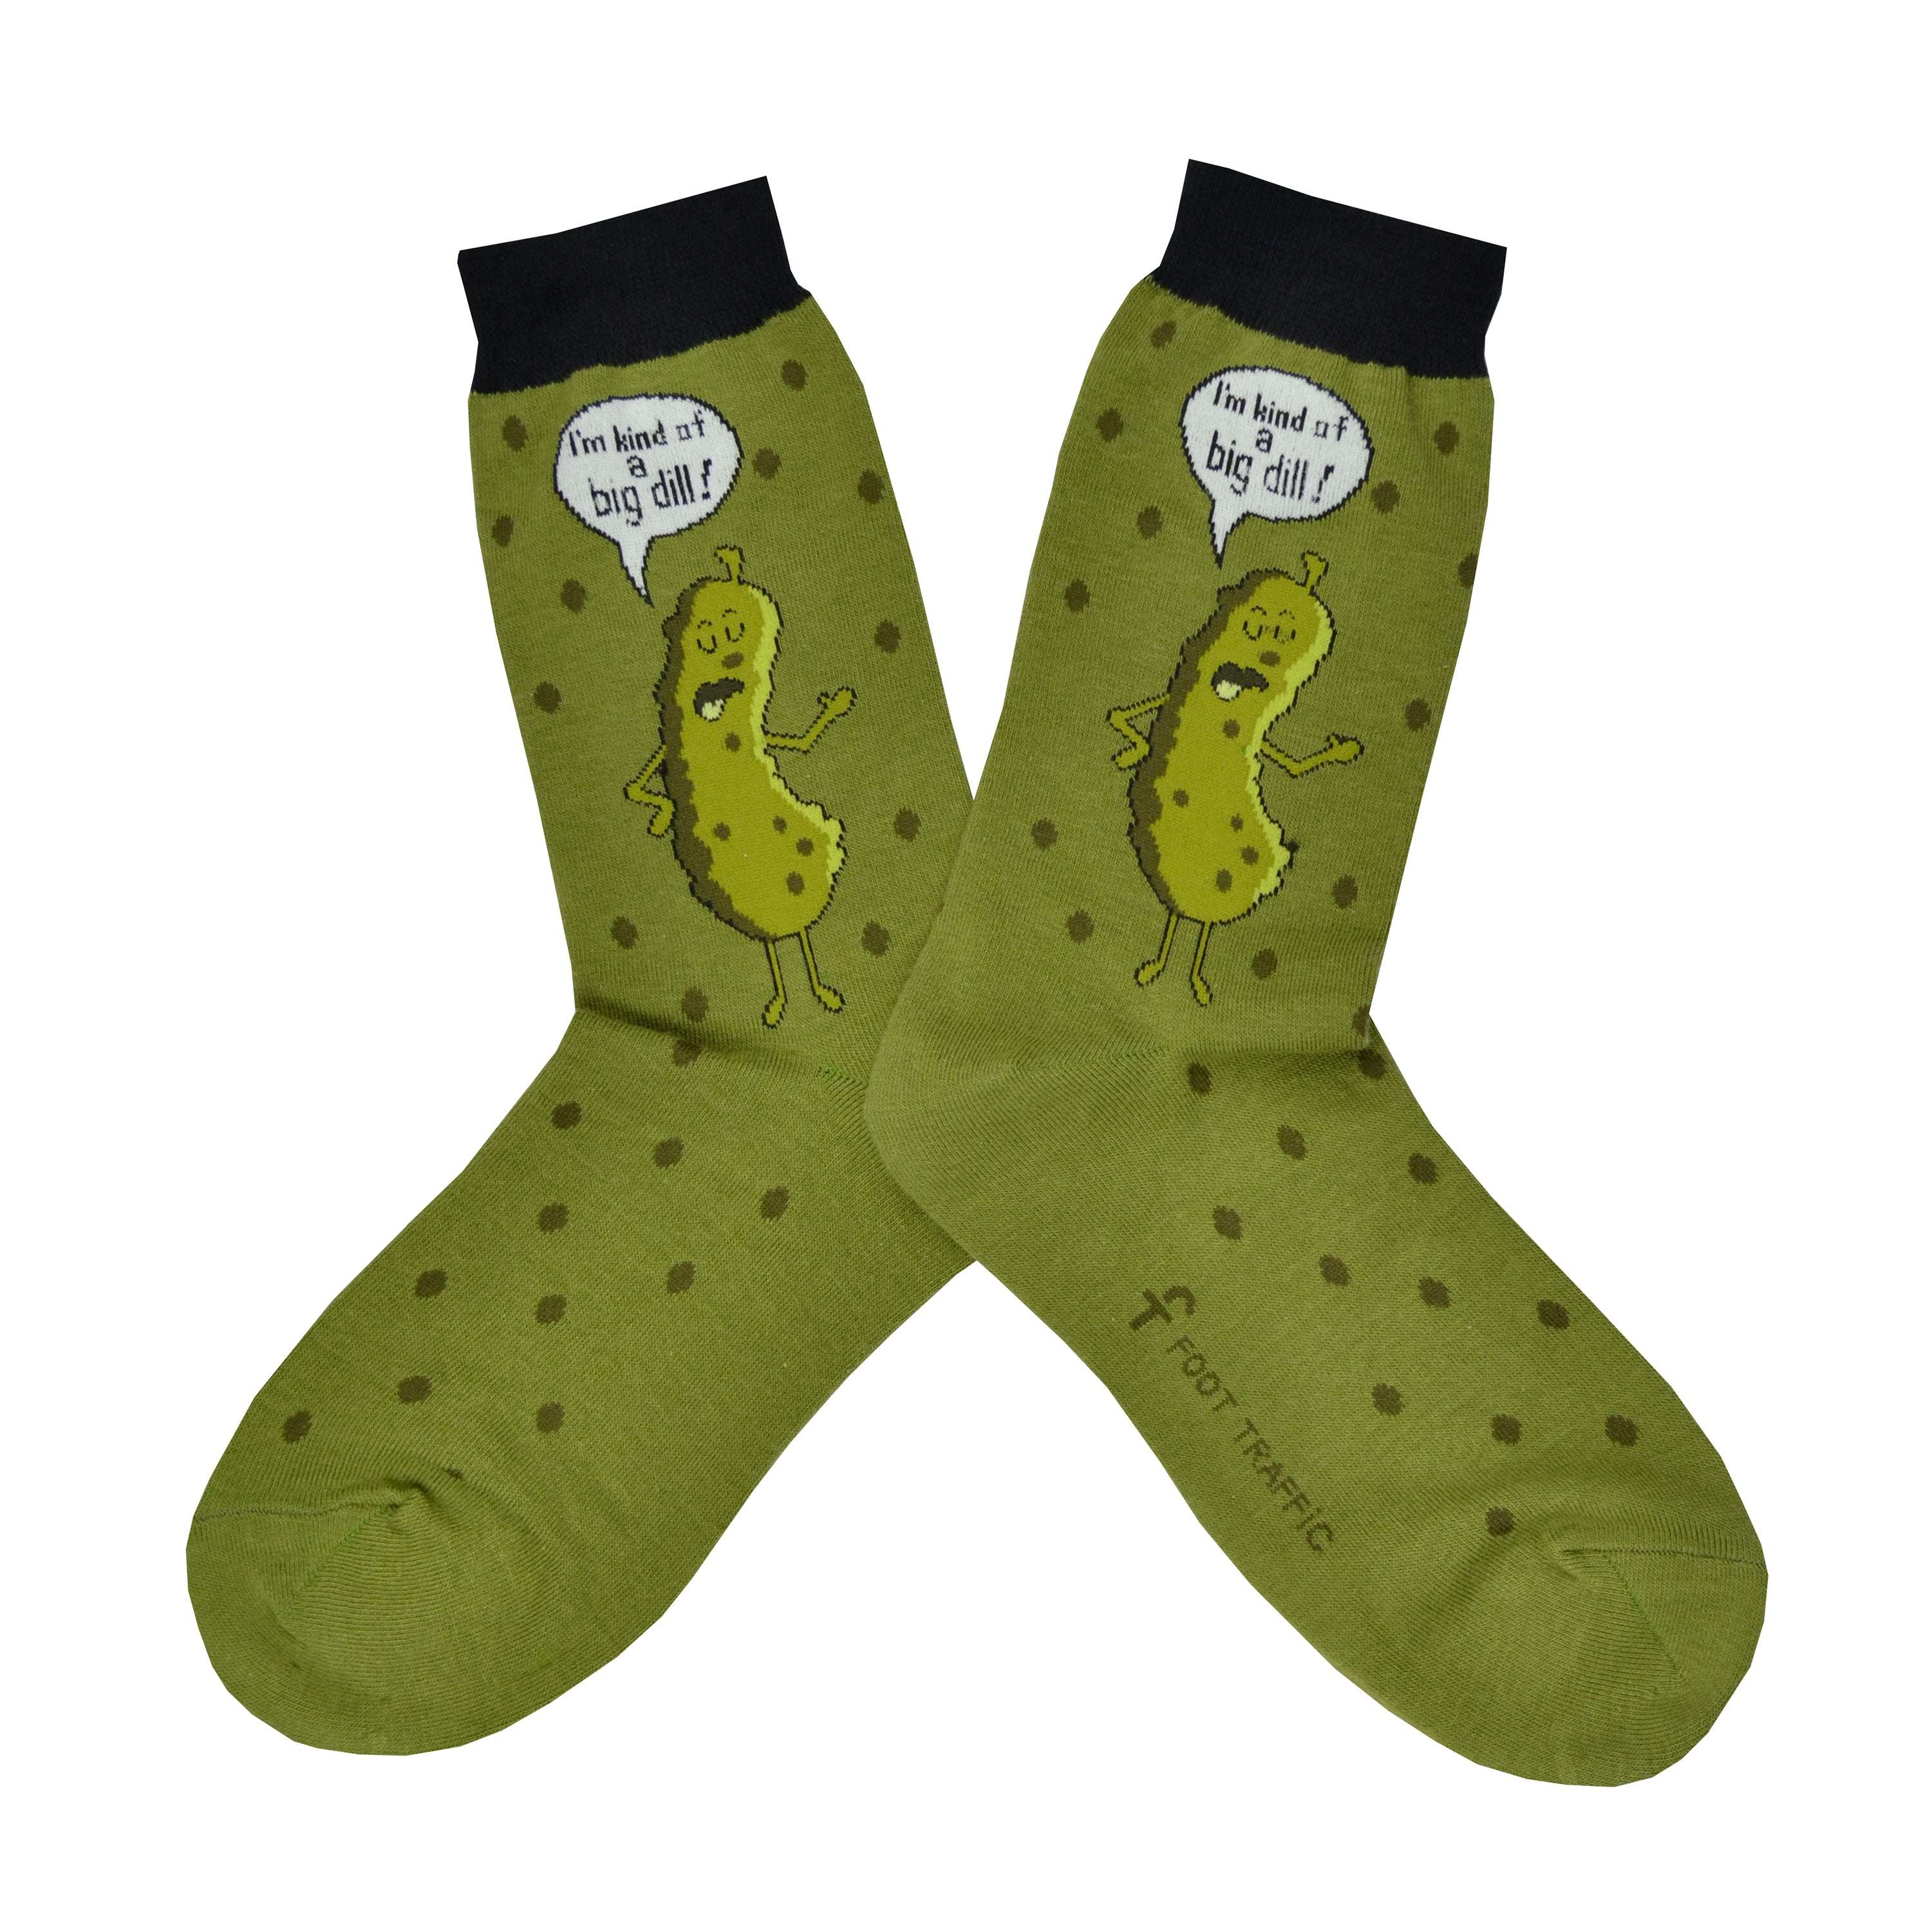 These green cotton funny women's crew socks with a black cuff by the brand Foot Traffic have a picture of a talking dill pickle on them and a word bubble that says 